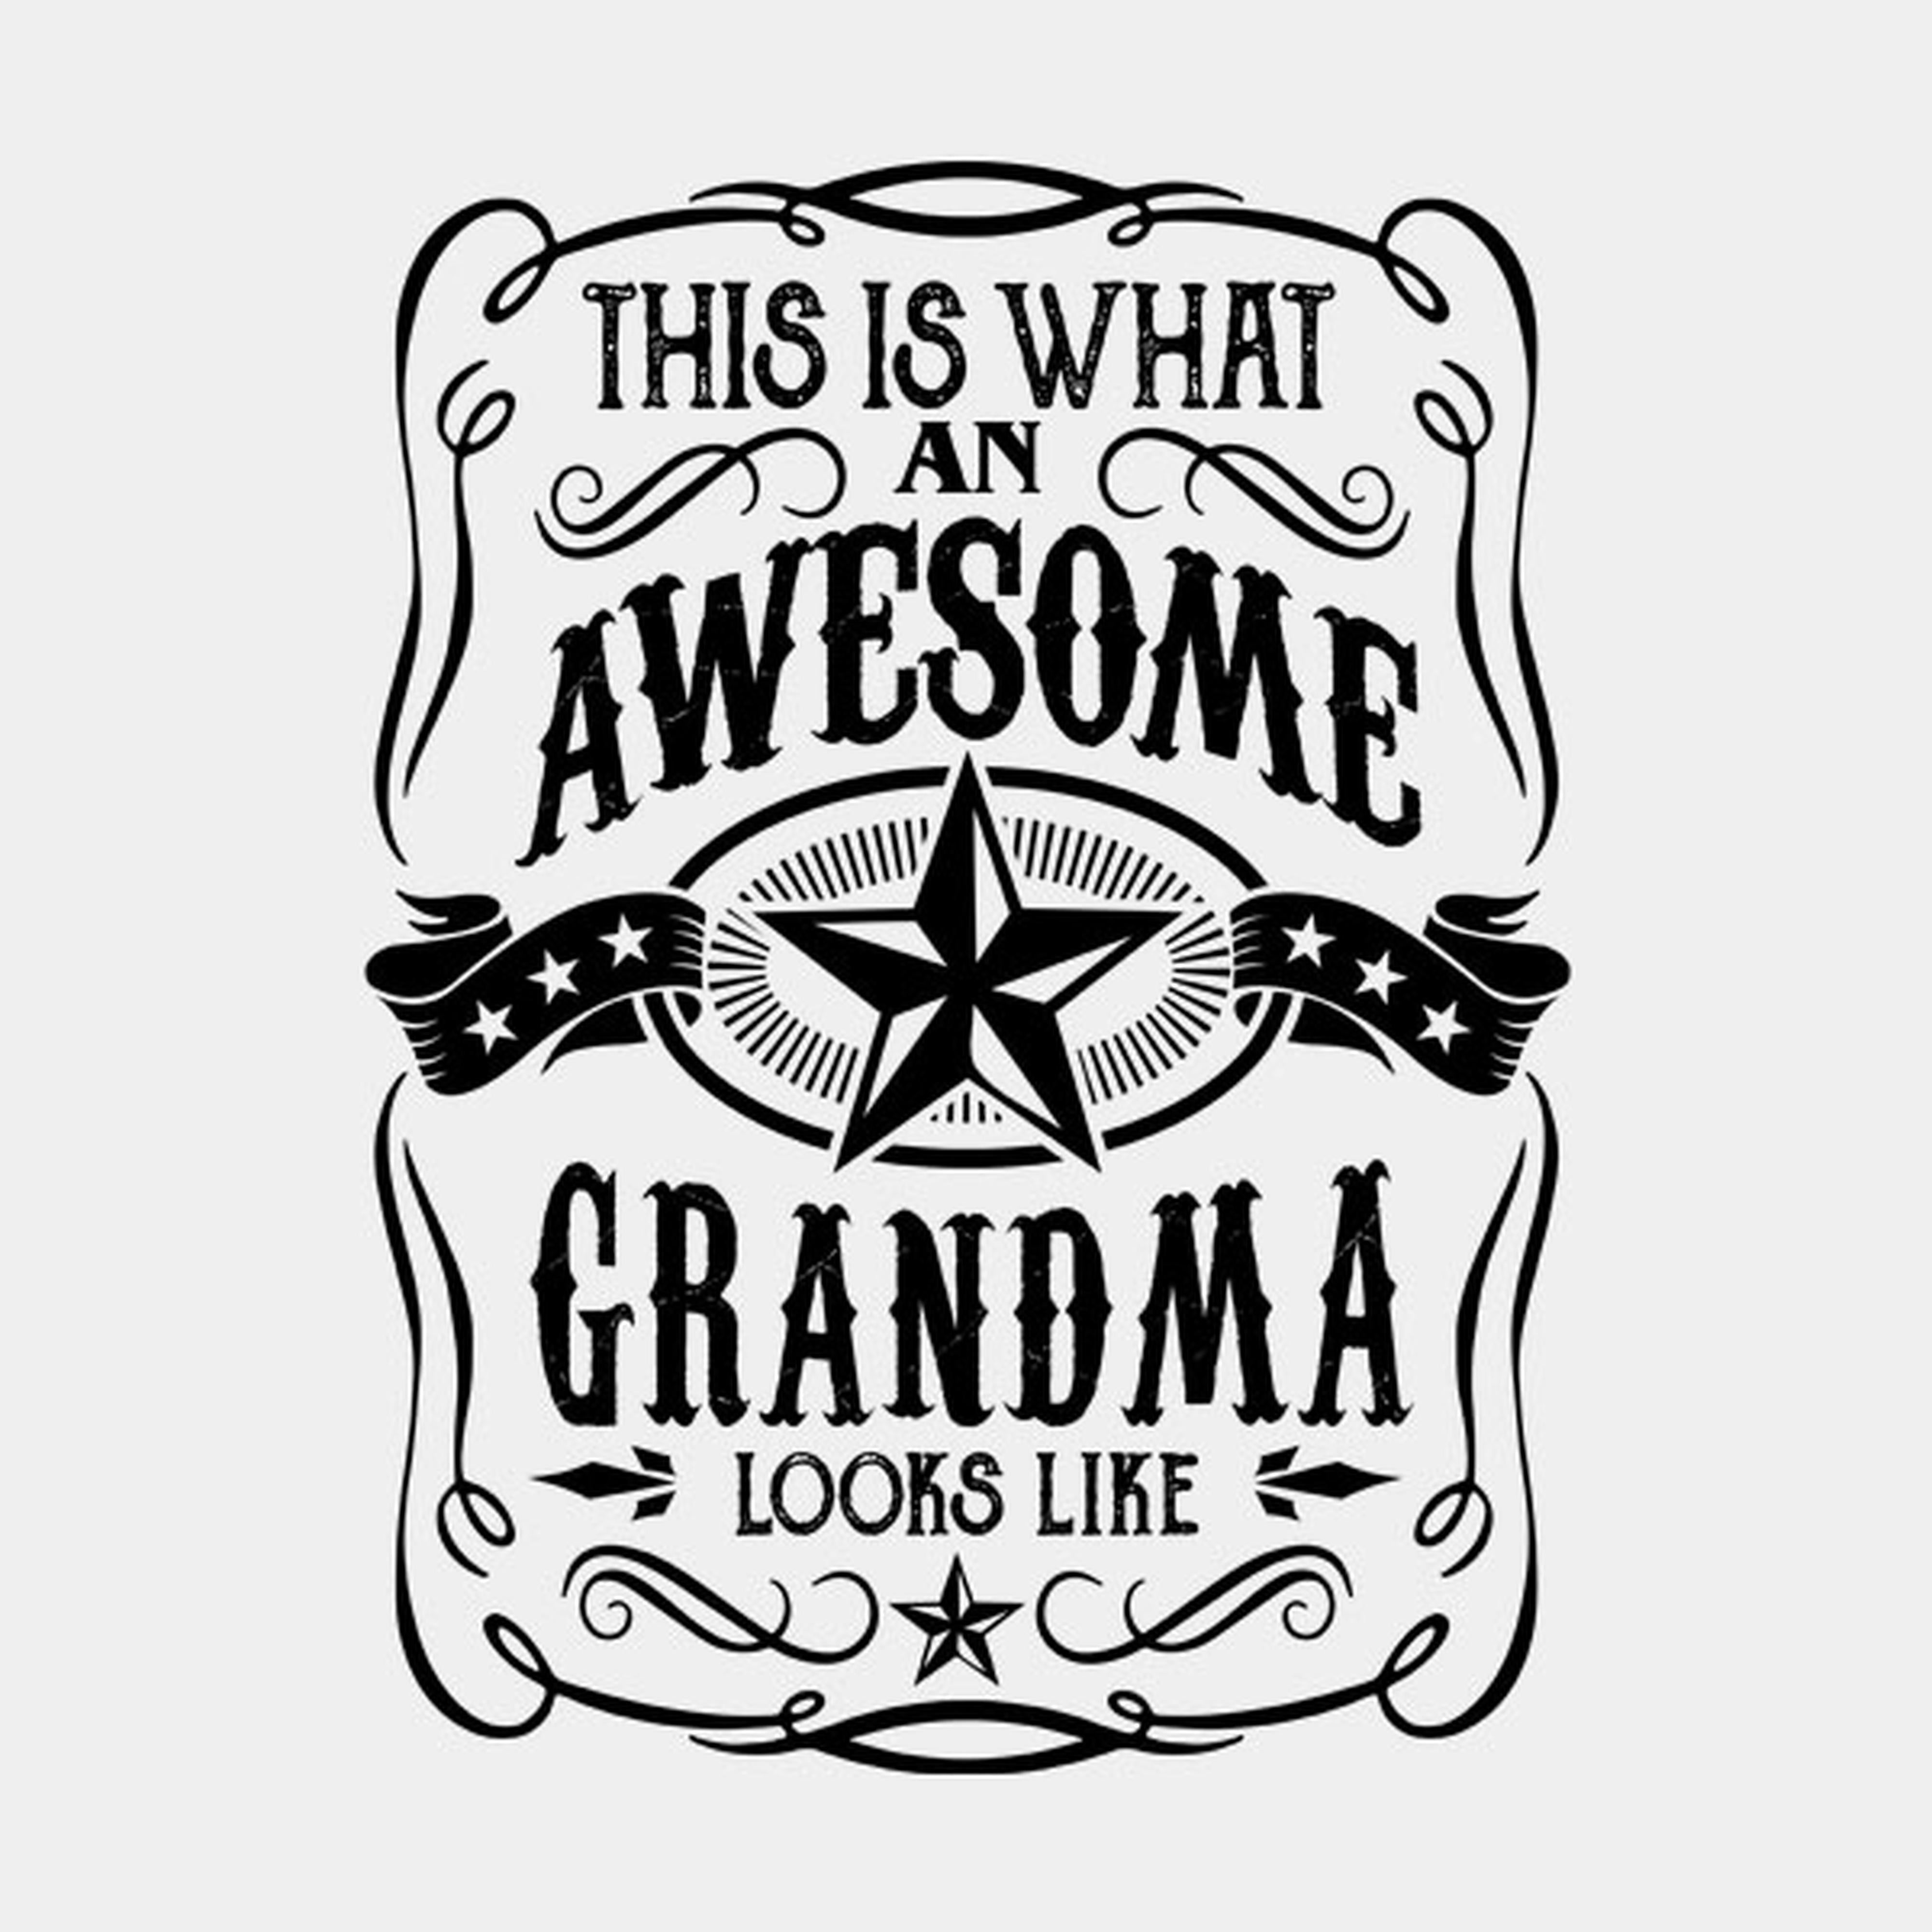 This is what an awesome grandma looks like - T-shirt